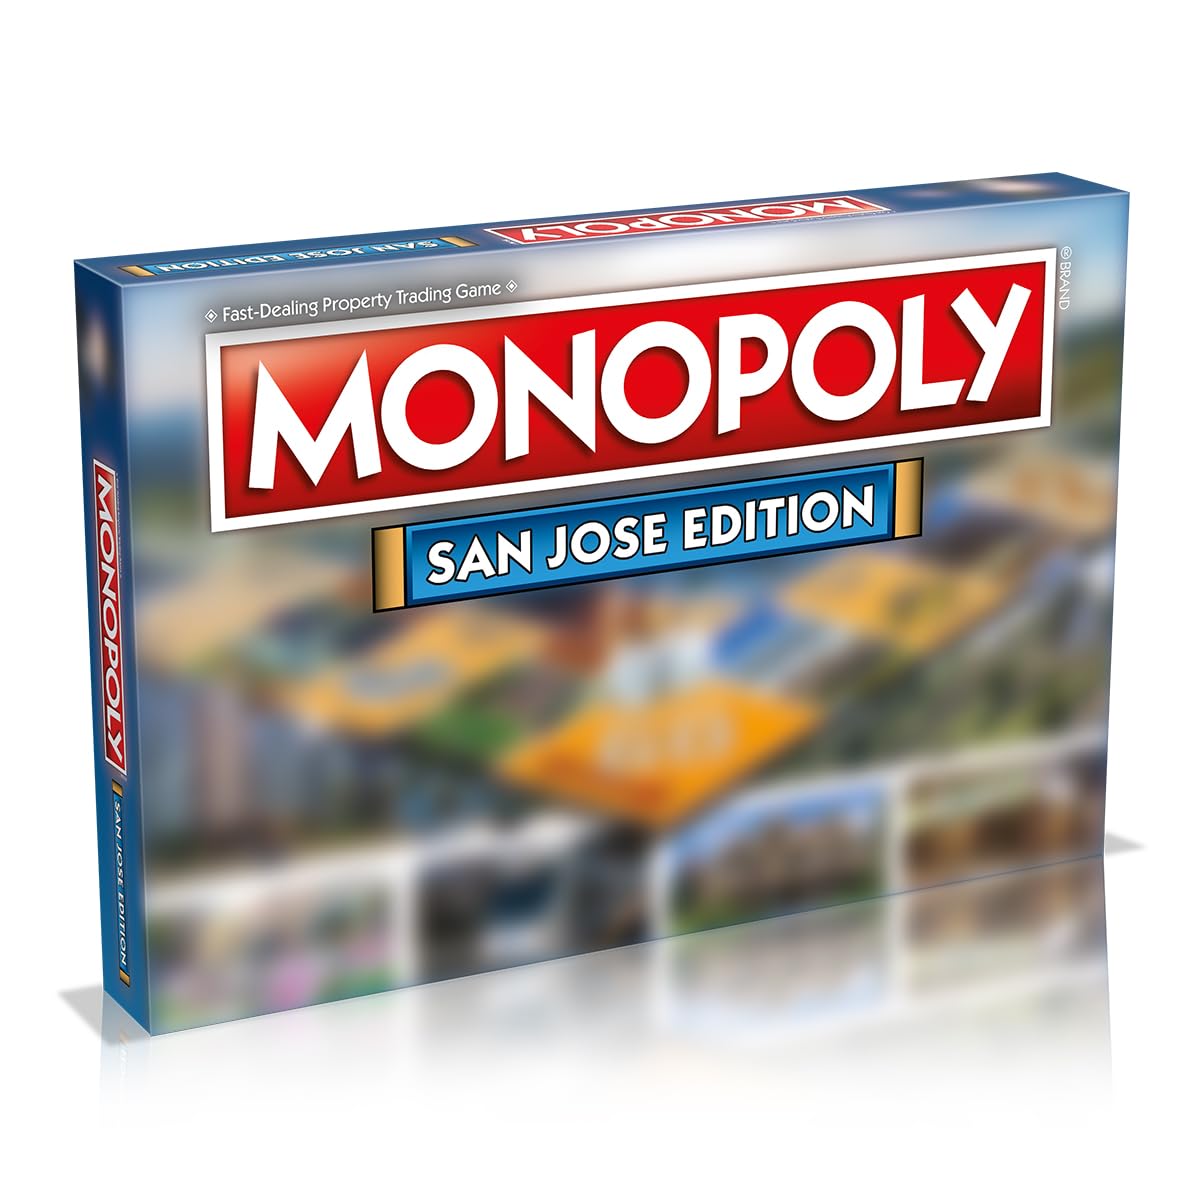 San Jose Monopoly Family Board Game, for 2 to 6 Players, Adults and Kids Ages 8 and up, Buy, Sell and Trade Your Way to Success